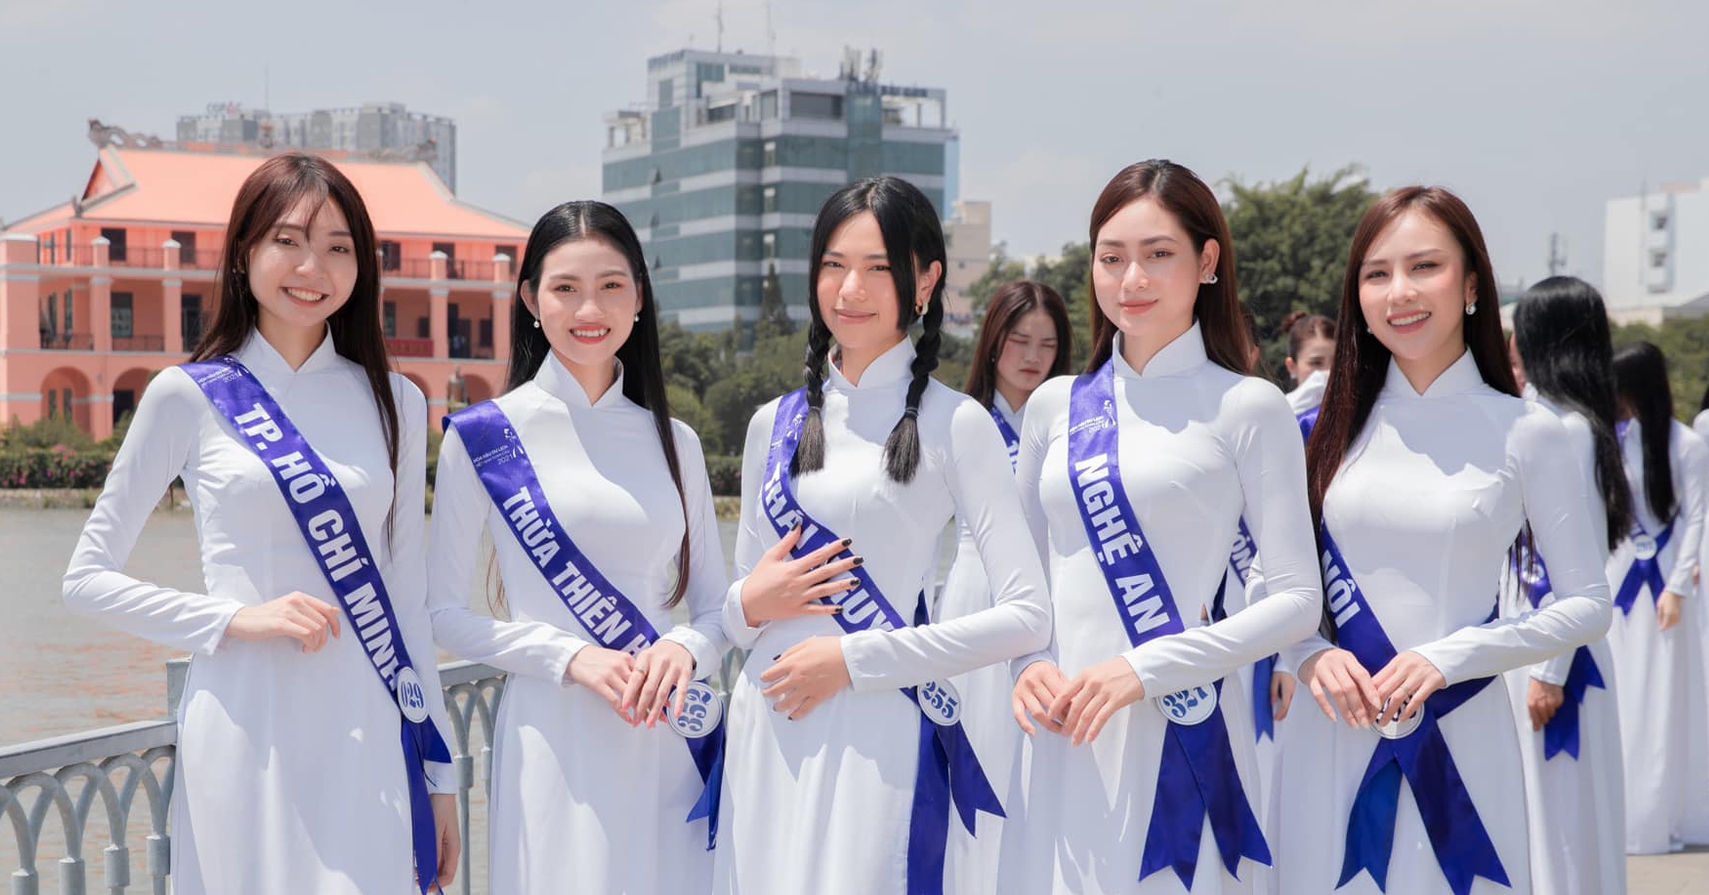 On which channel is the link to watch the final of Miss Tourism Vietnam Global 2021 live?